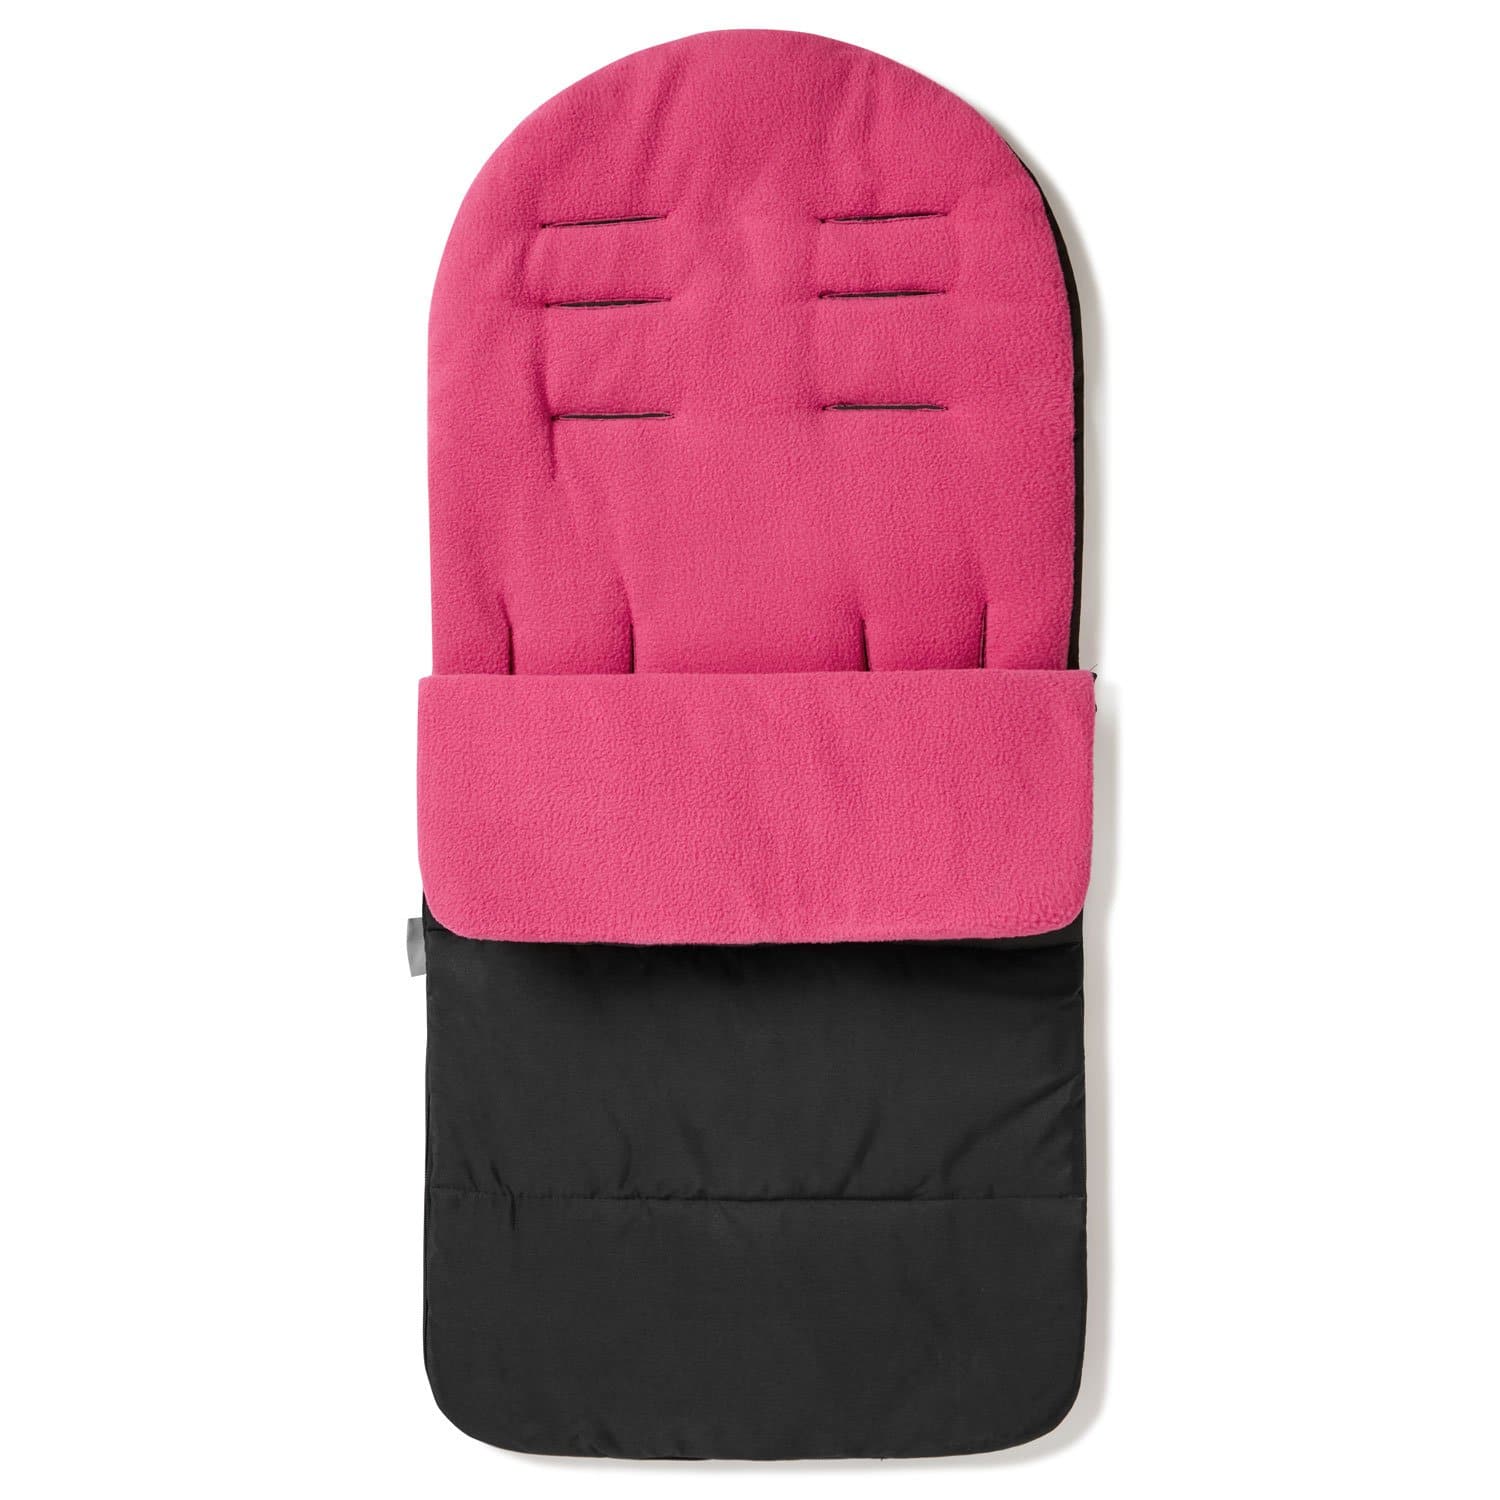 Premium Footmuff / Cosy Toes Compatible with Stokke - Pink Rose / Fits All Models | For Your Little One